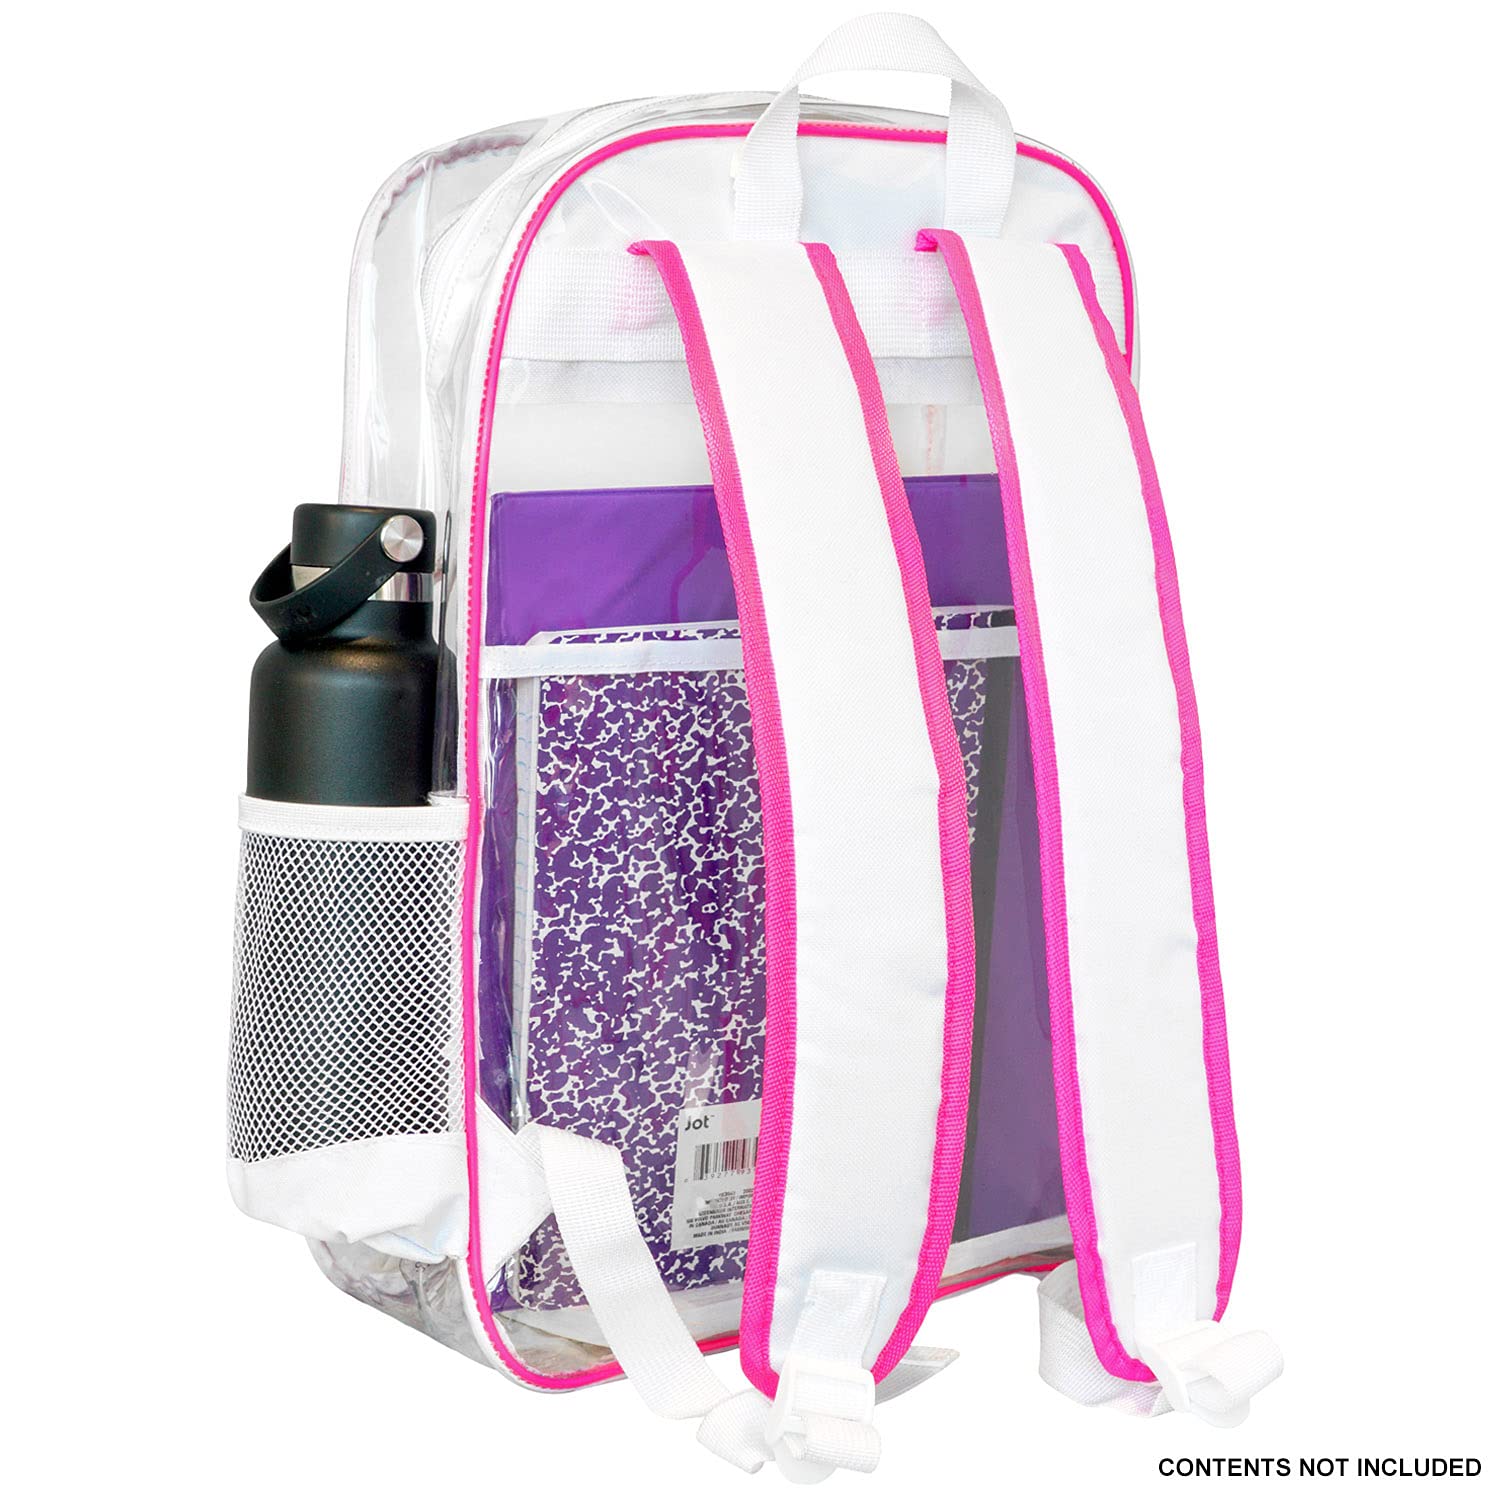 Meister All-Access Clear Backpack - Meets School & Event Security Bag Requirements - Pink / White